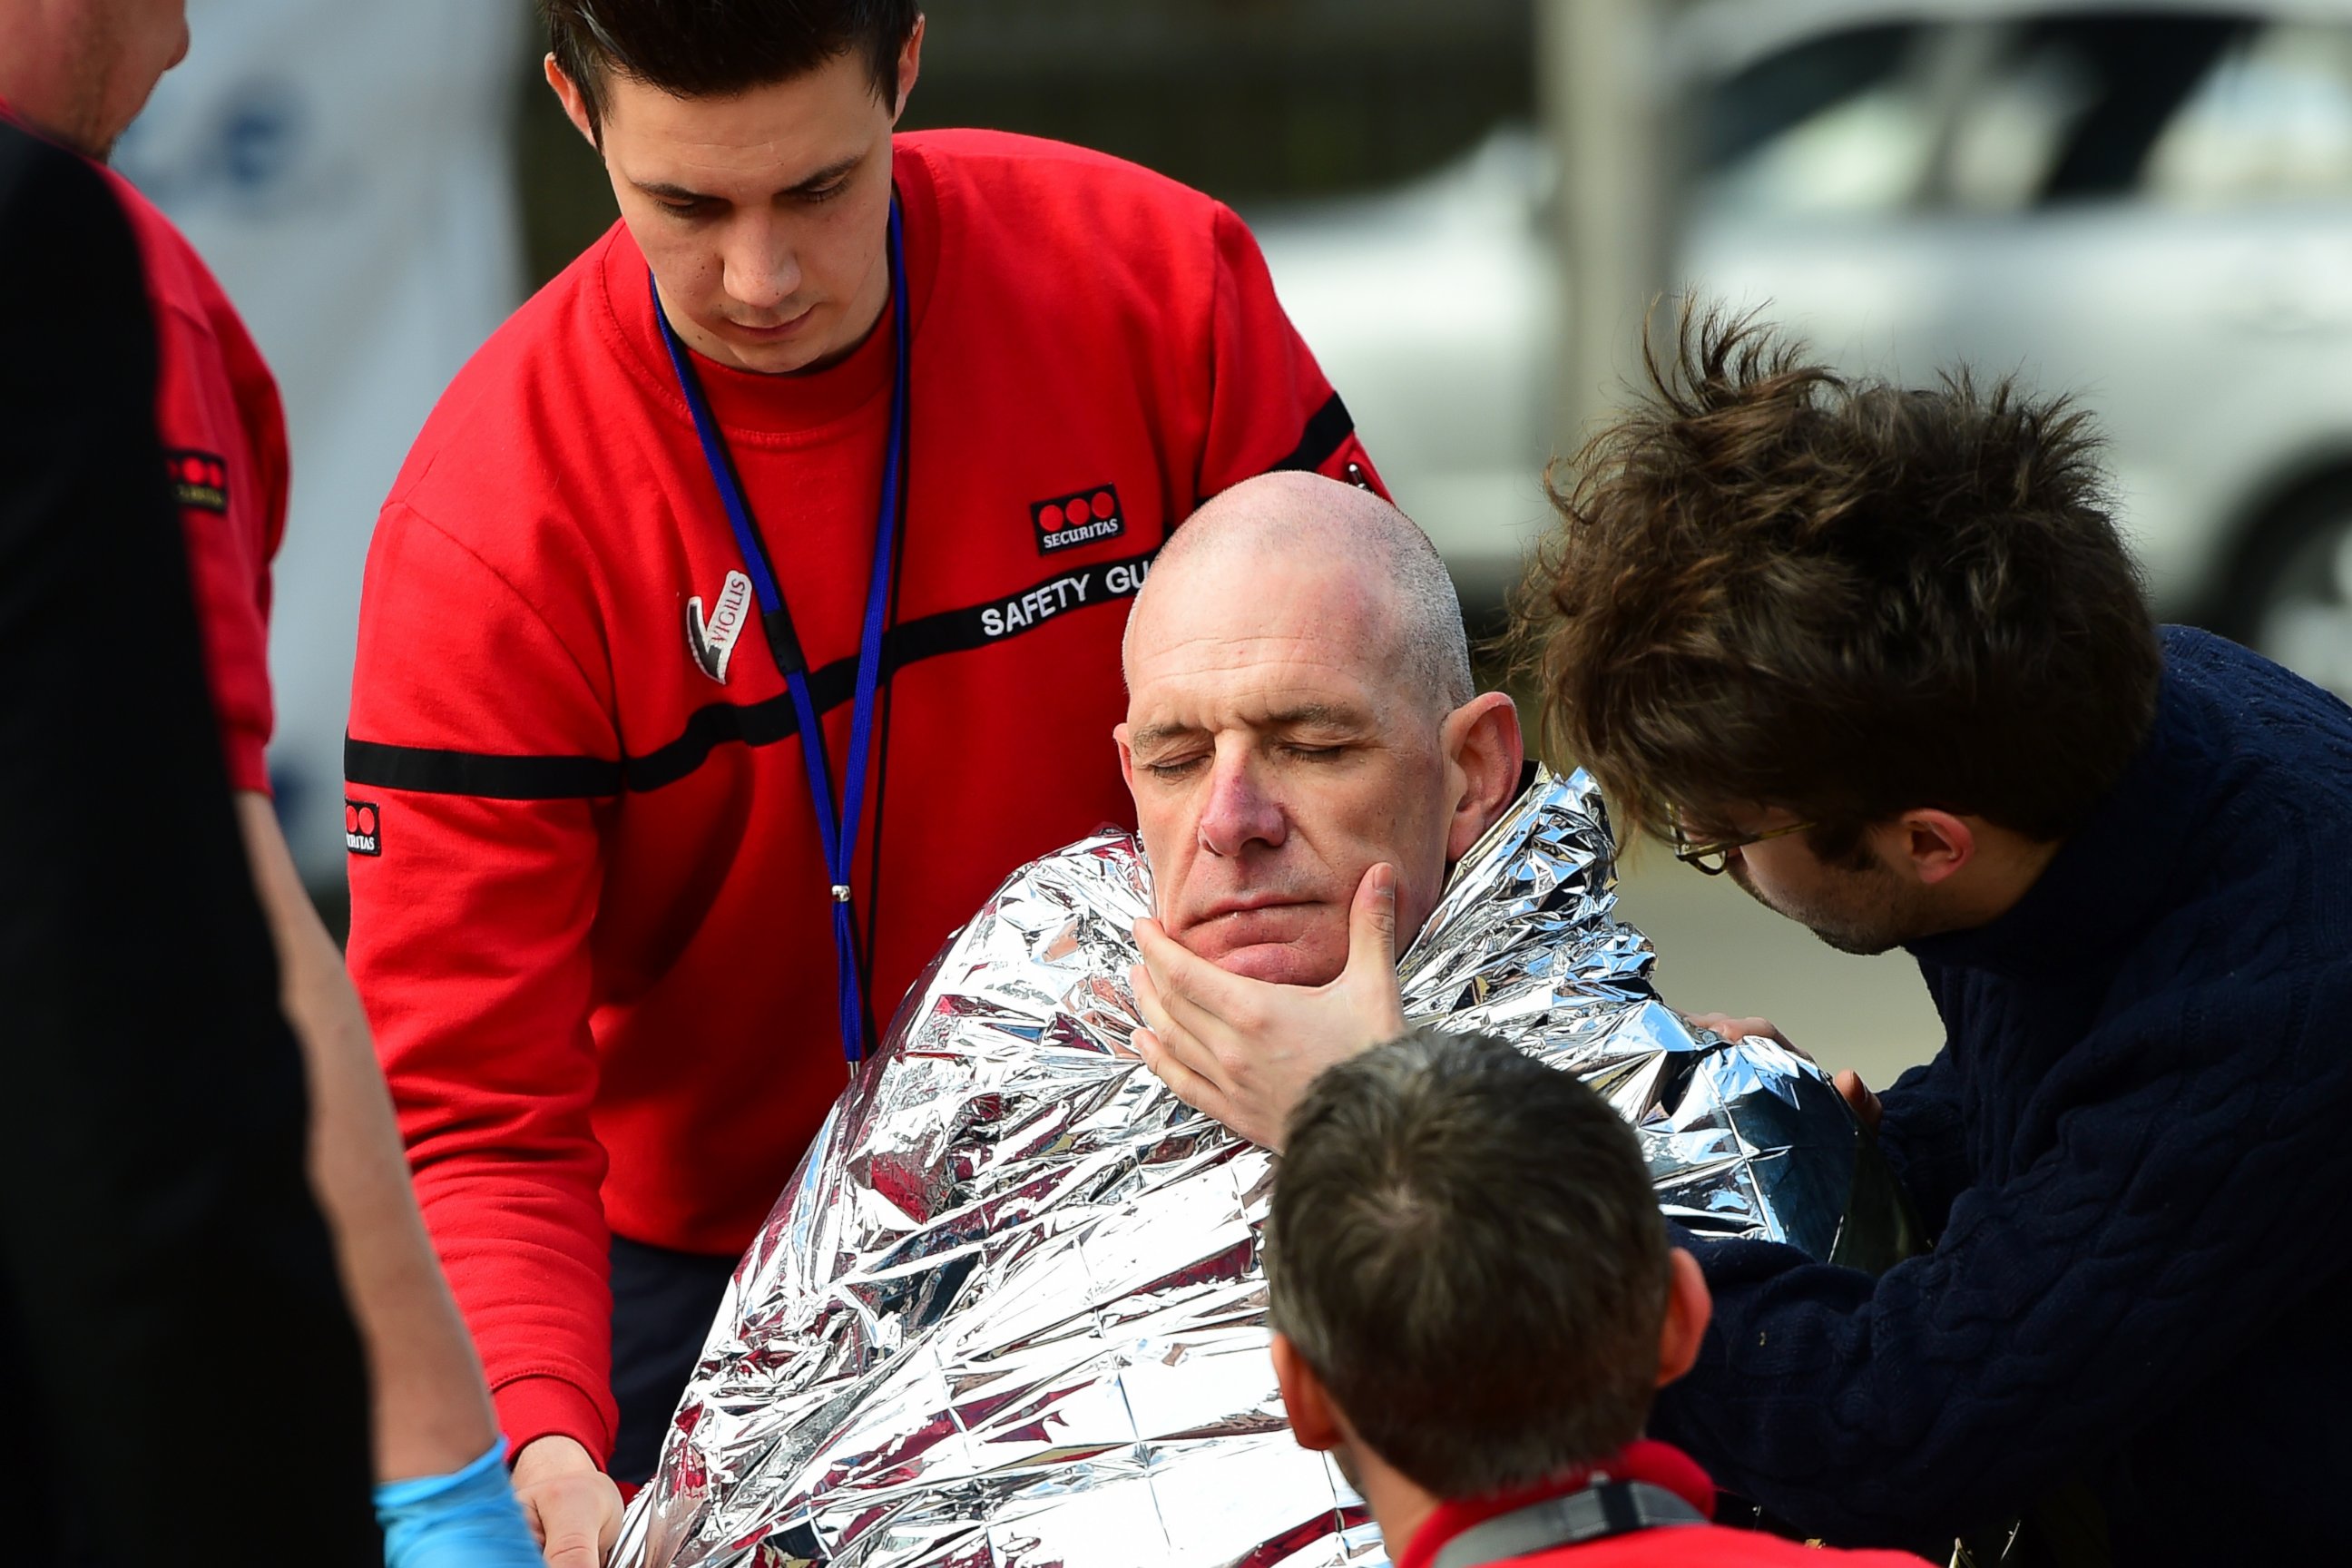 PHOTO: A victim receives first aid by rescuers, March 22, 2016 near Maalbeek metro station in Brussels, after a blast at this station near the EU institutions caused deaths and injuries. 